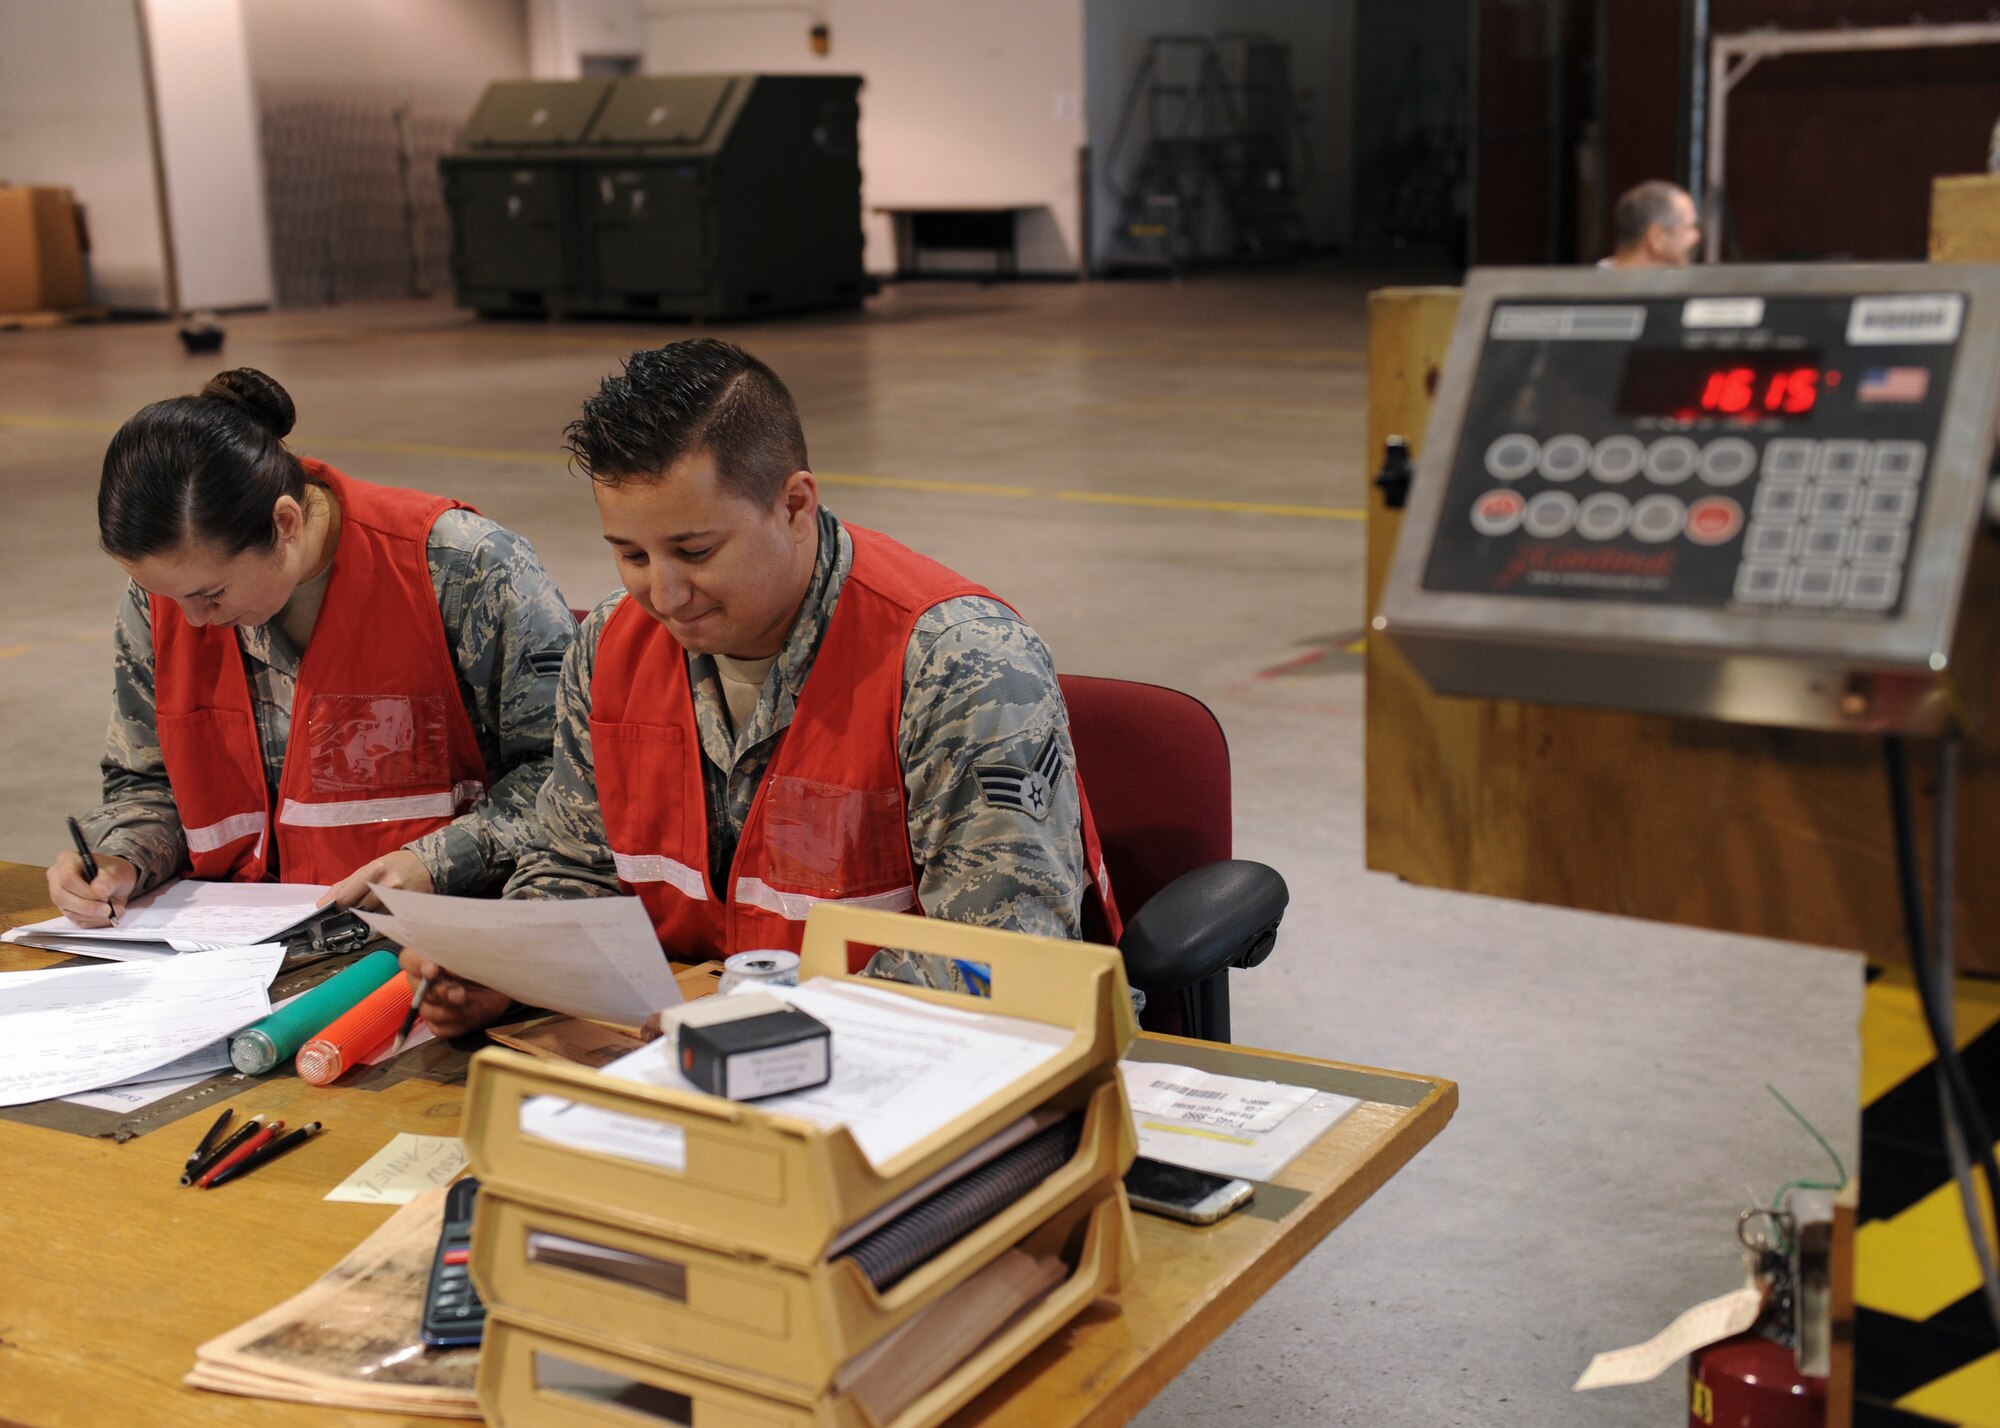 U.S. Air Force Airman 1st Class Ashley Clancy ,left, and Airman 1st Class Dominic Jarman ,right, 509th Logistic Readiness Squadron (LRS) augumentees, annotate data at the weighing station during Exercise Global Thunder 17 (GT17) at Whiteman Air Force Base, Mo., Oct. 25, 2016. Airmen were augmented from different sections of LRS to support the deployment mission. GT17 is an annual command and control exercise designed to train U.S. Strategic Command forces and assess joint operational readiness.  (U.S. Air Force Senior Airman Danielle Quilla)